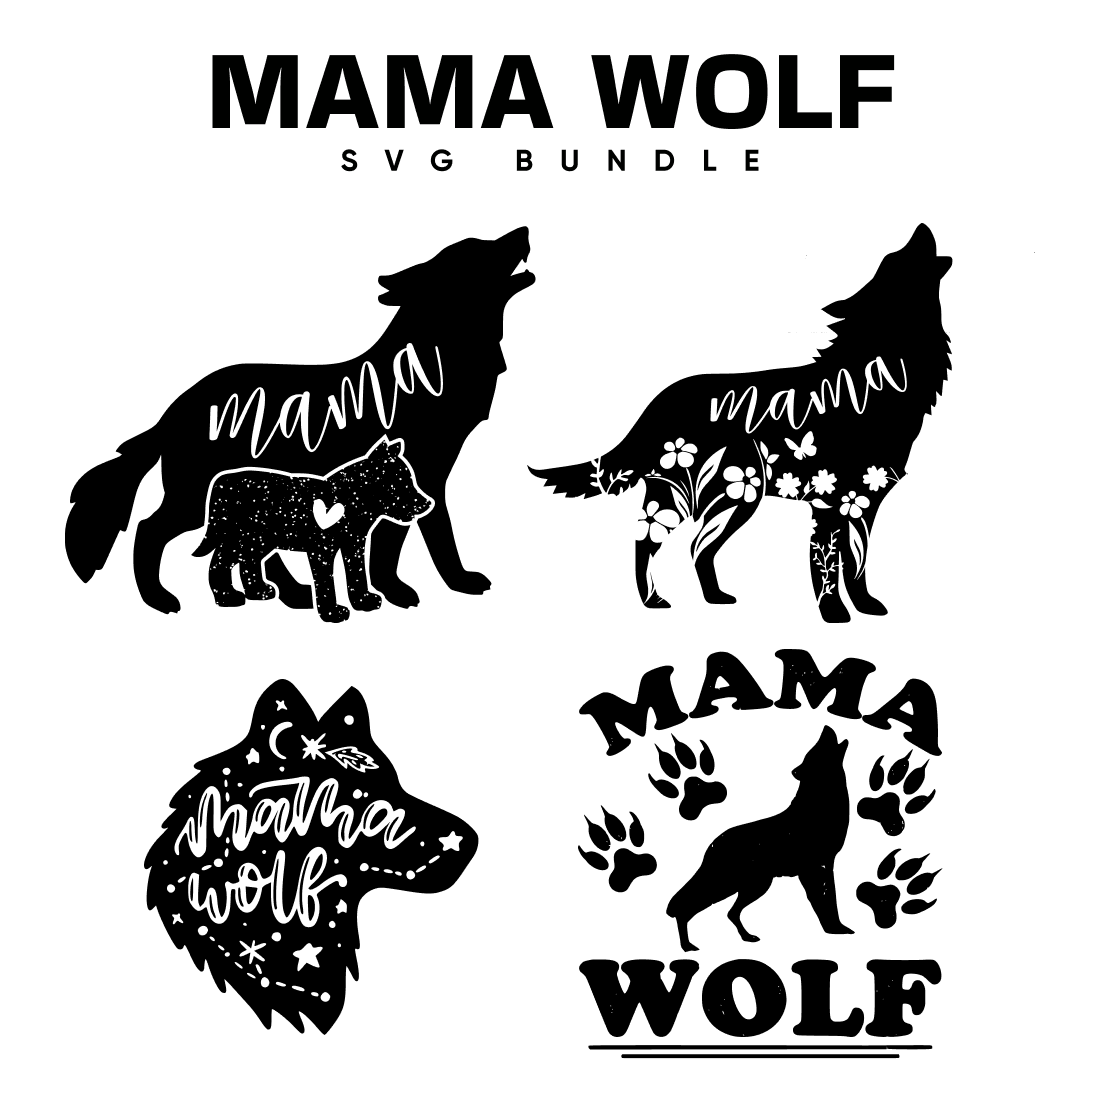 The mama wolf svg bundle includes a wolf.